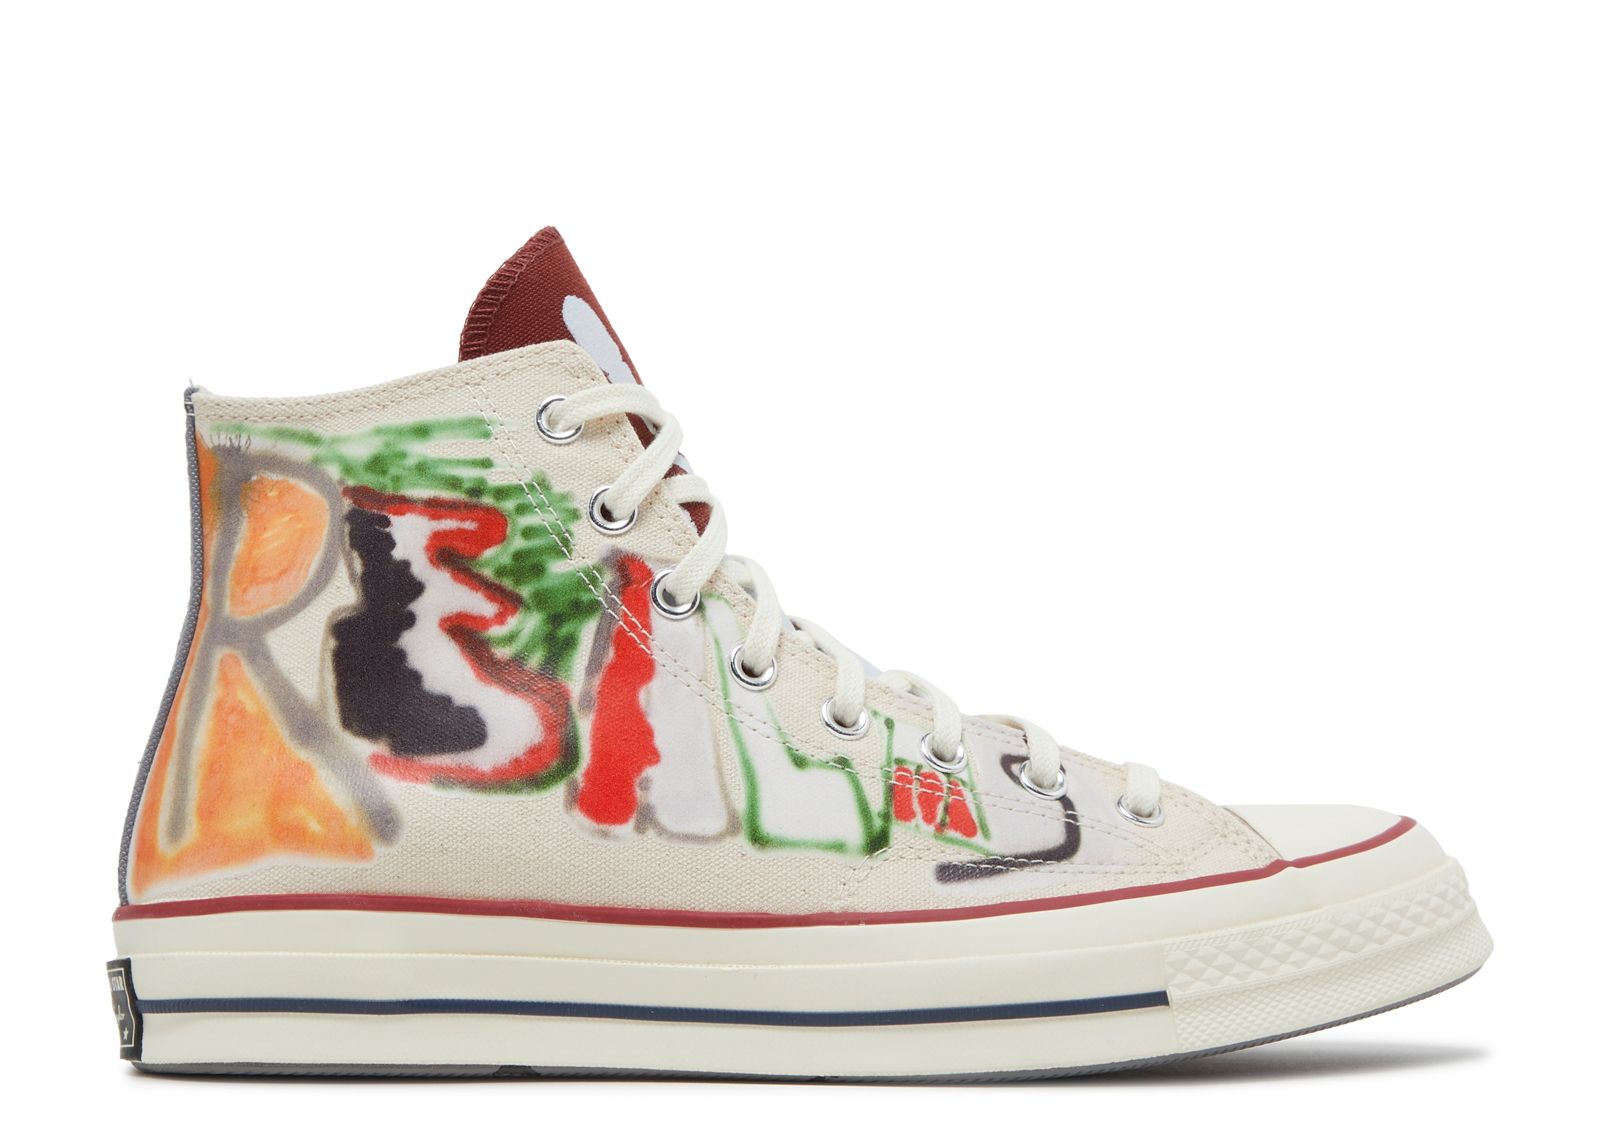 Кроссовки Converse Come Tees X Converse Chuck 70 High 'Realms And Realities', разноцветный converse x come tees floral triangle hoodie